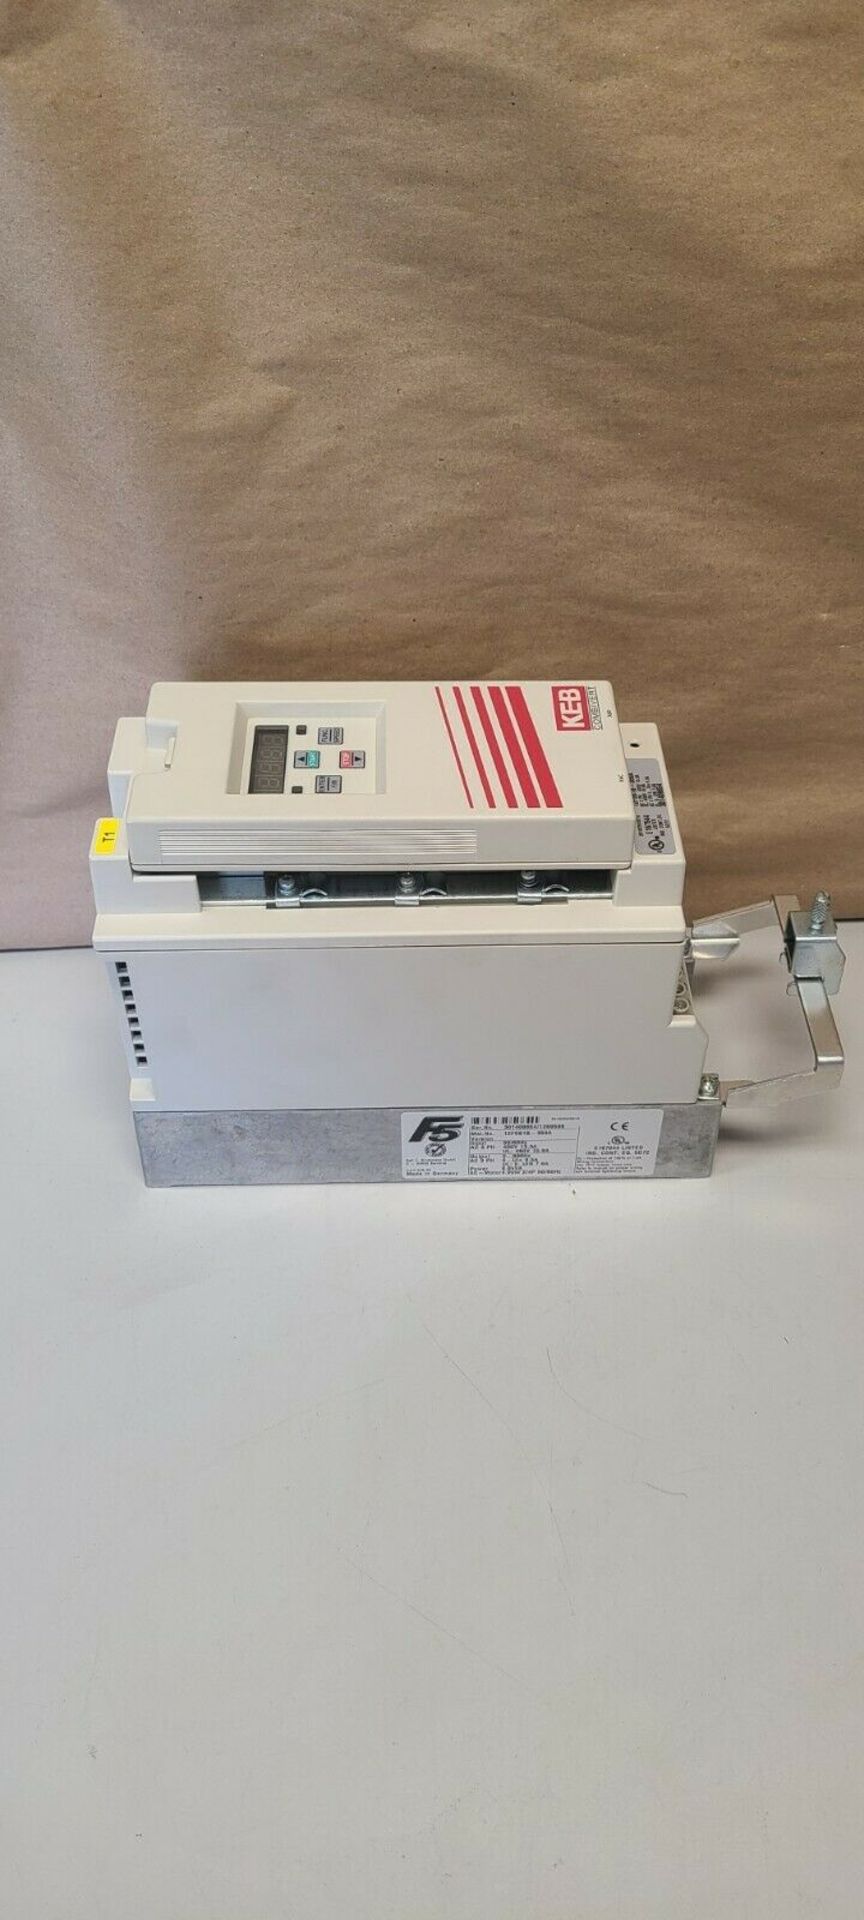 KEB COMBIVERT DRIVE FREQUENCY INVERTER - Image 5 of 5